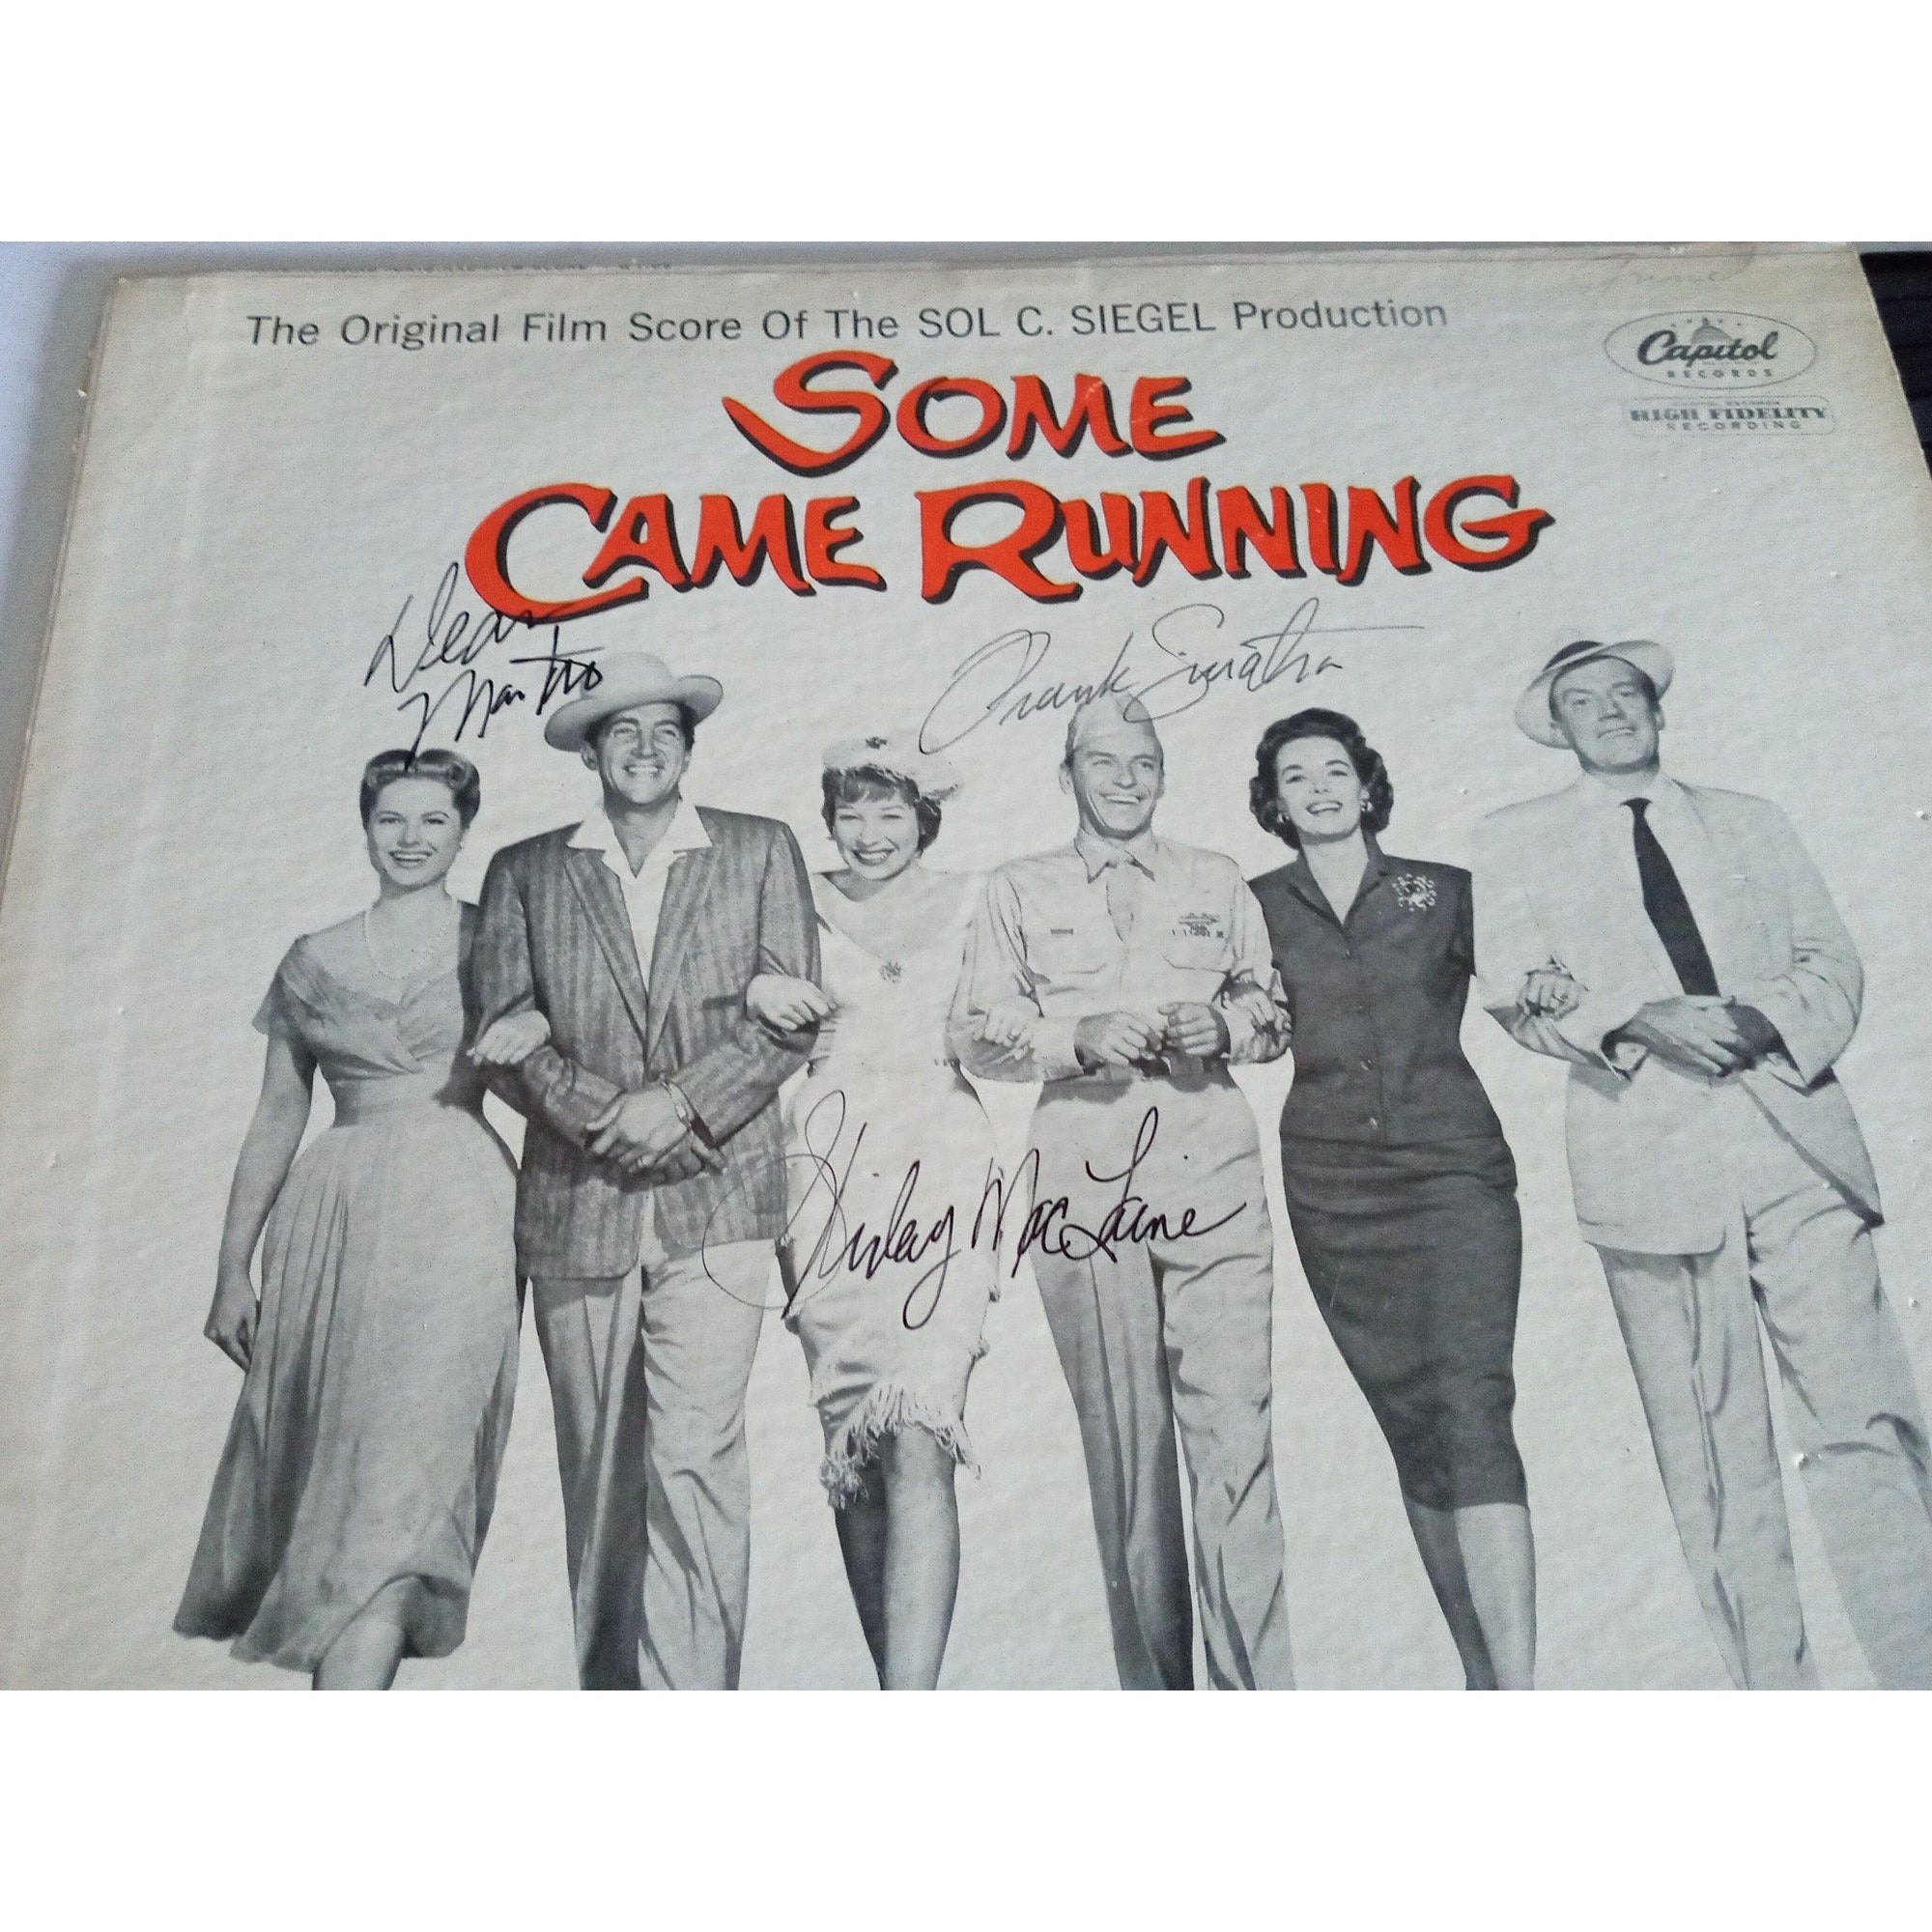 Frank Sinatra, Dean Martin, Shirley MacLaine Some Camp Came Running LP signed with proof